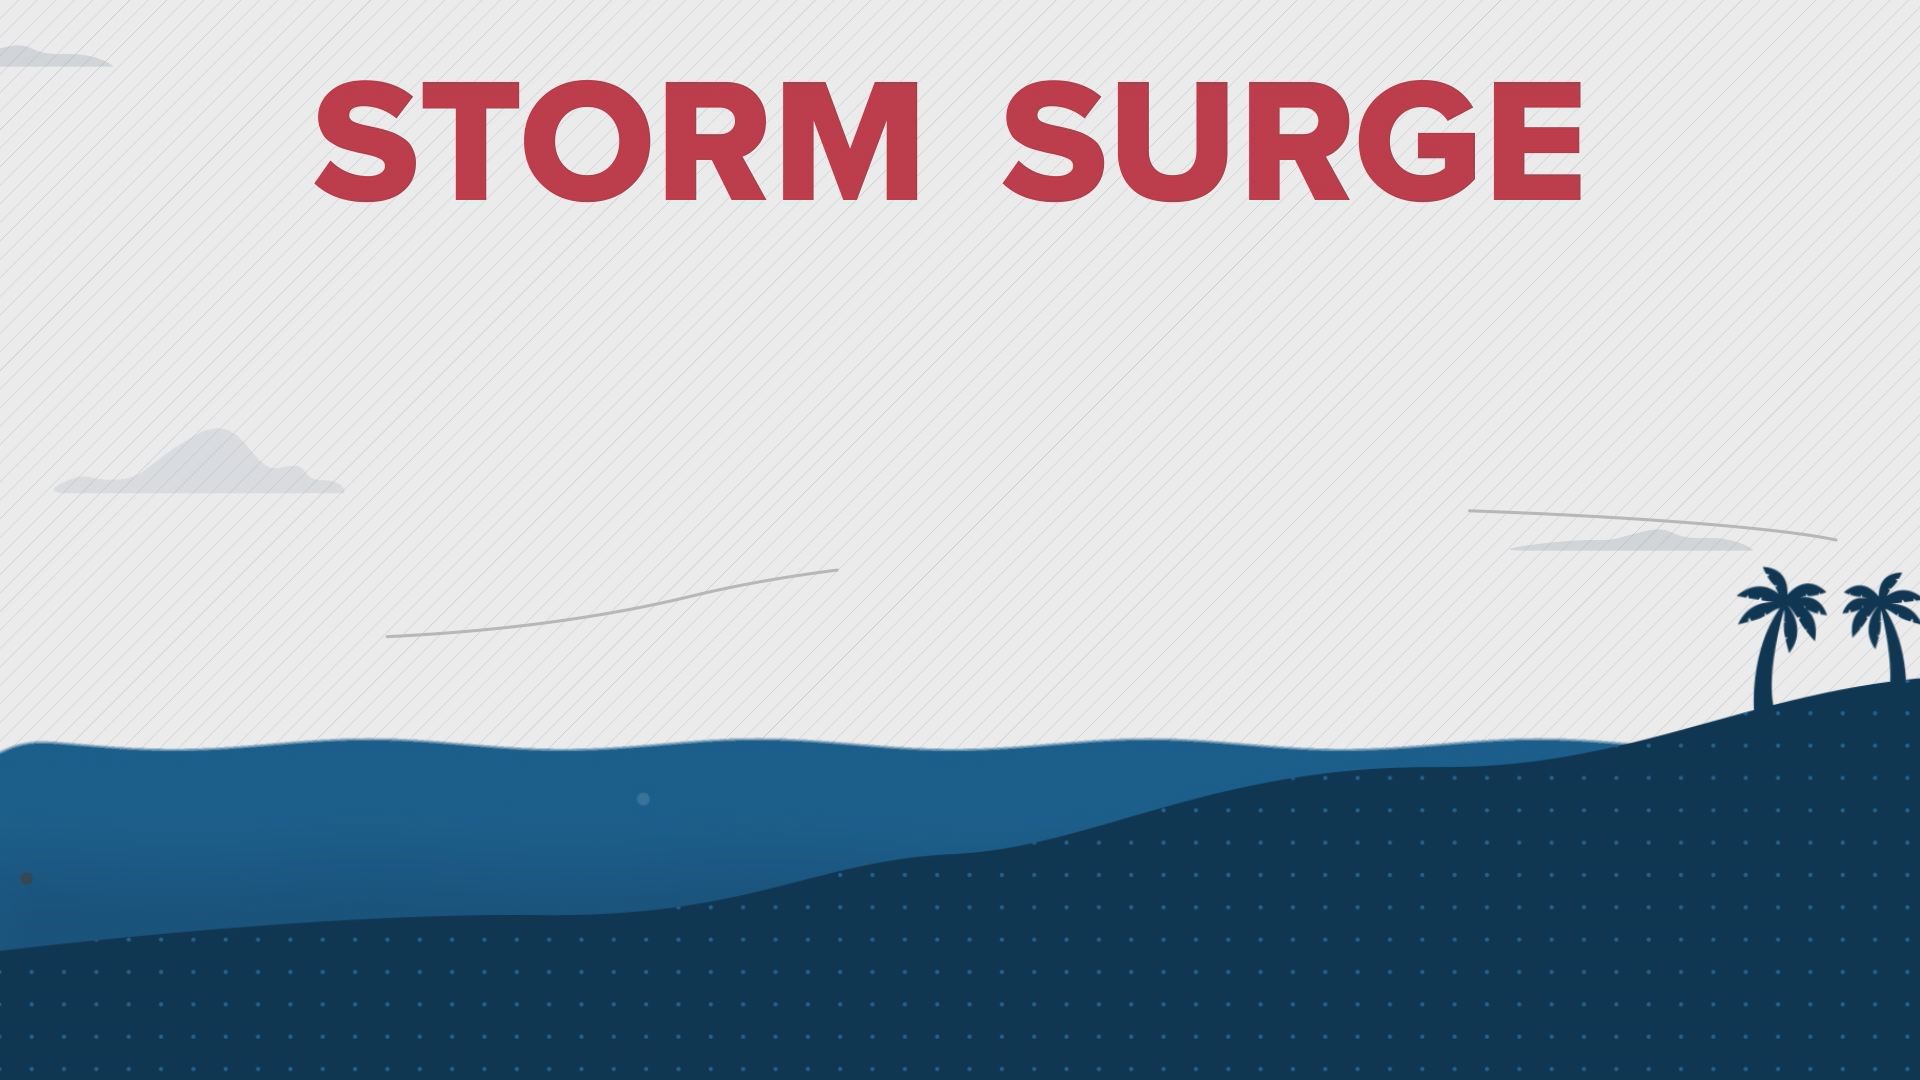 Storm surge is the most deadly part of a hurricane in many cases. But why? Let’s dive into the science to learn more.